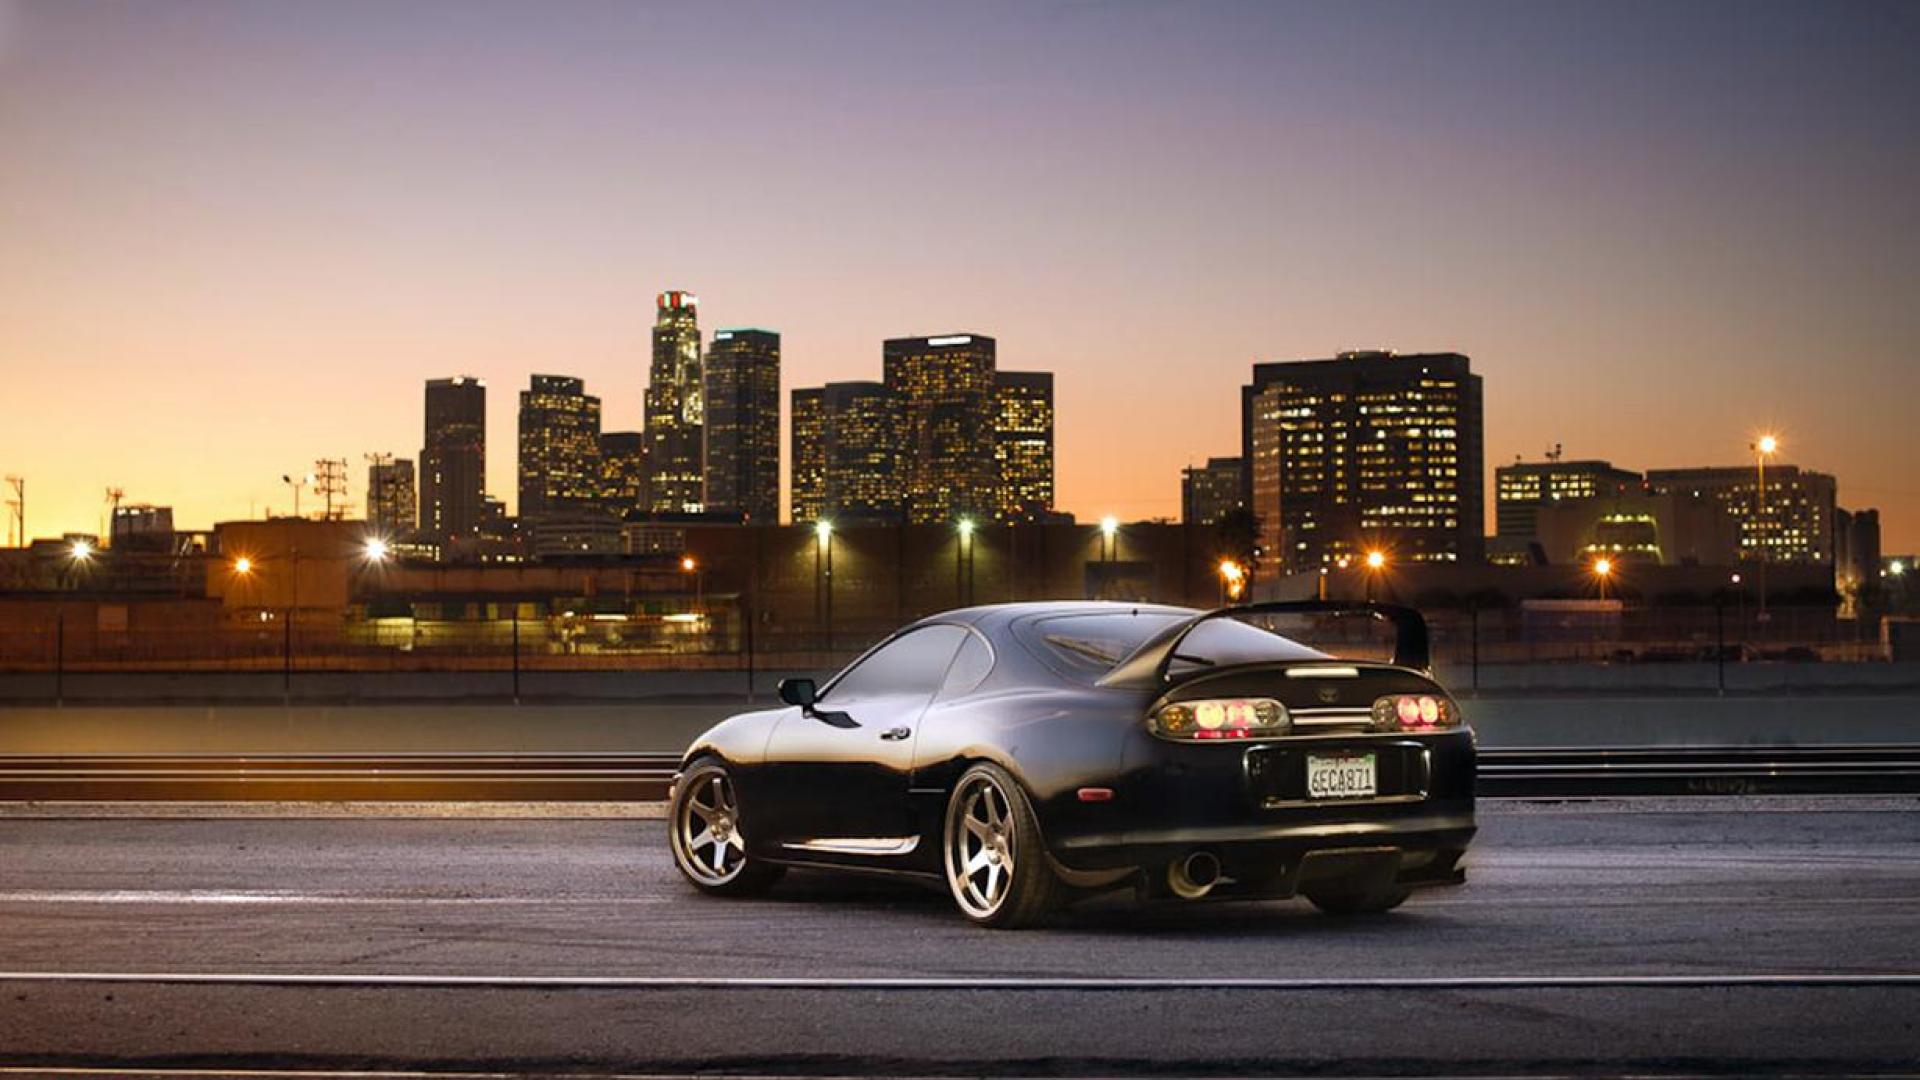 Toyota supra - - High Quality and Resolution Wallpapers